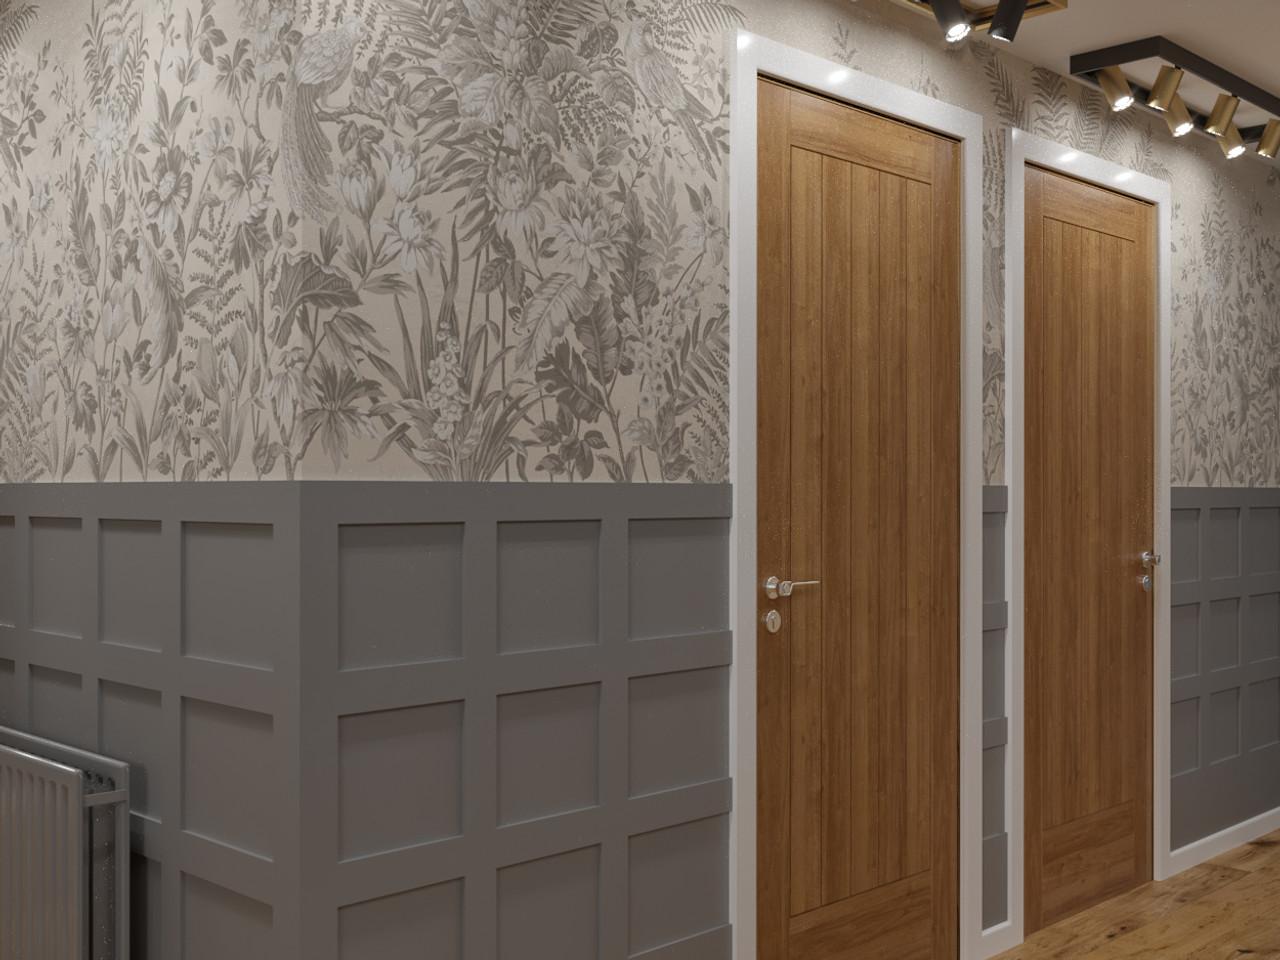 10 Great Half Wall Paneling Ideas to Spice Your Interior Up